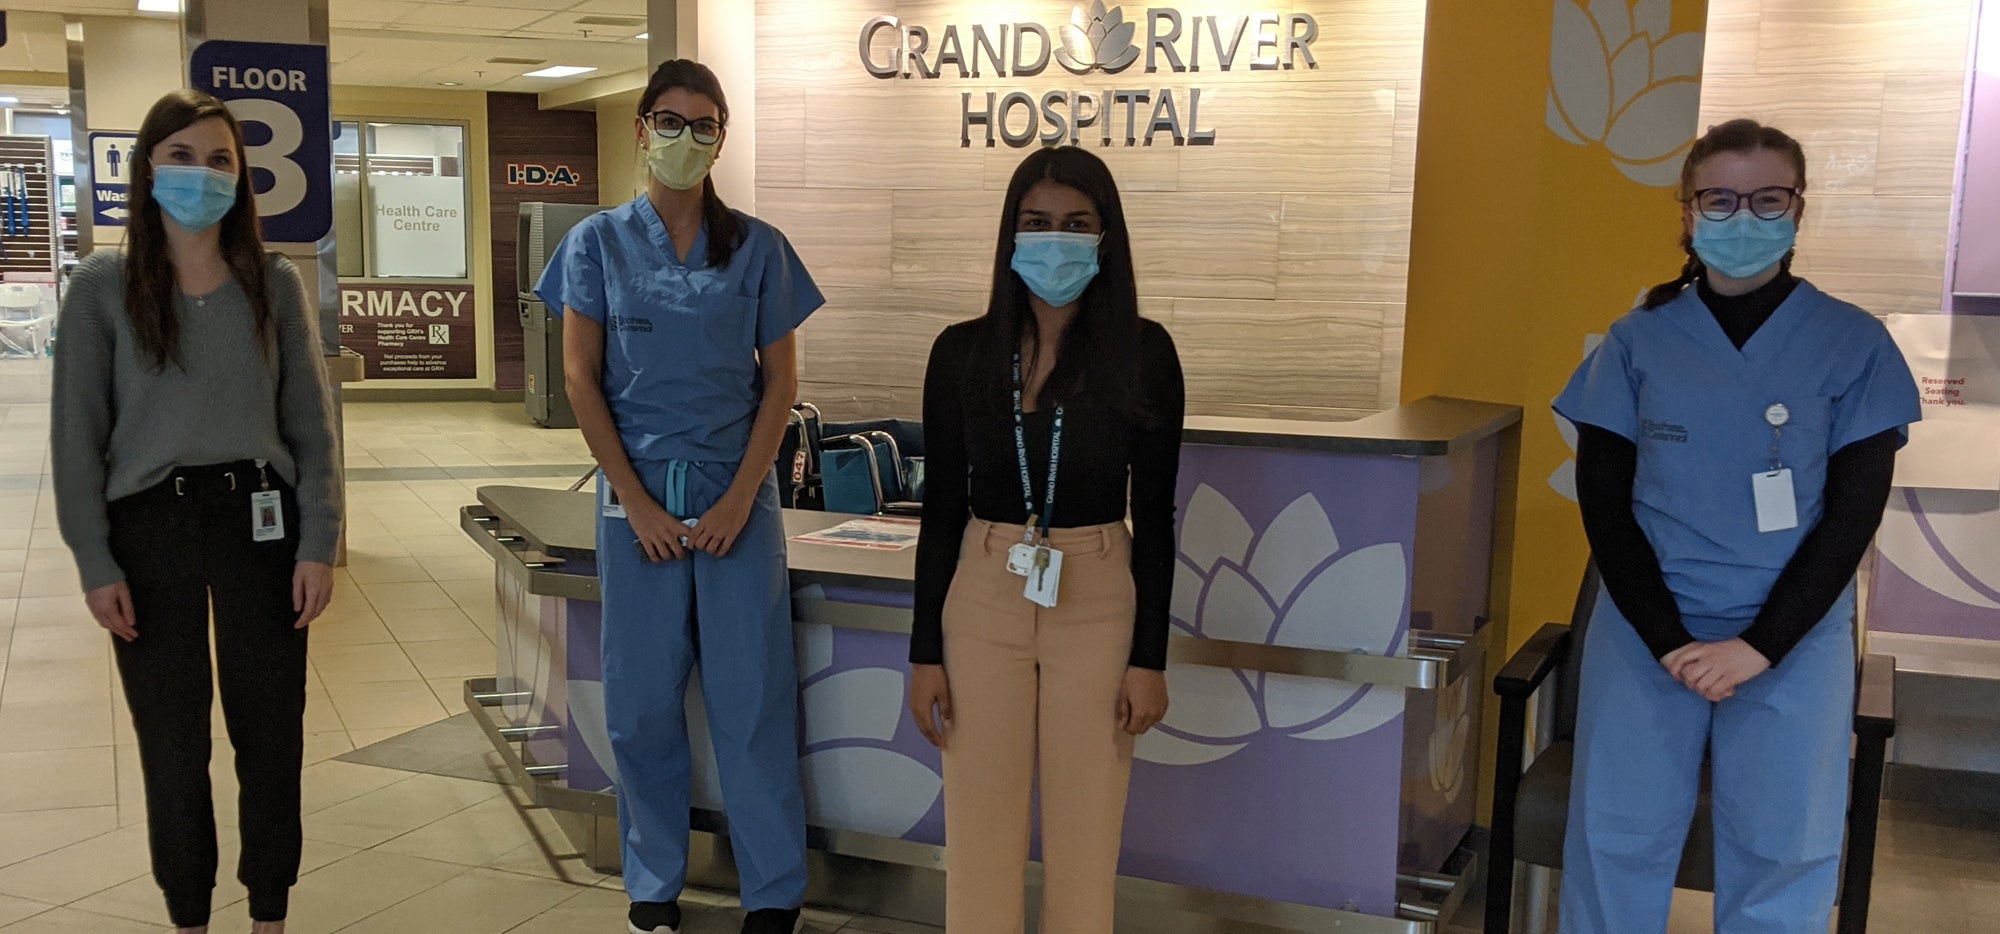 Students working at Grand River Hospital. Left to right: Lauren Thompson (Oncology), Melissa Garellek (Emergency Department), an